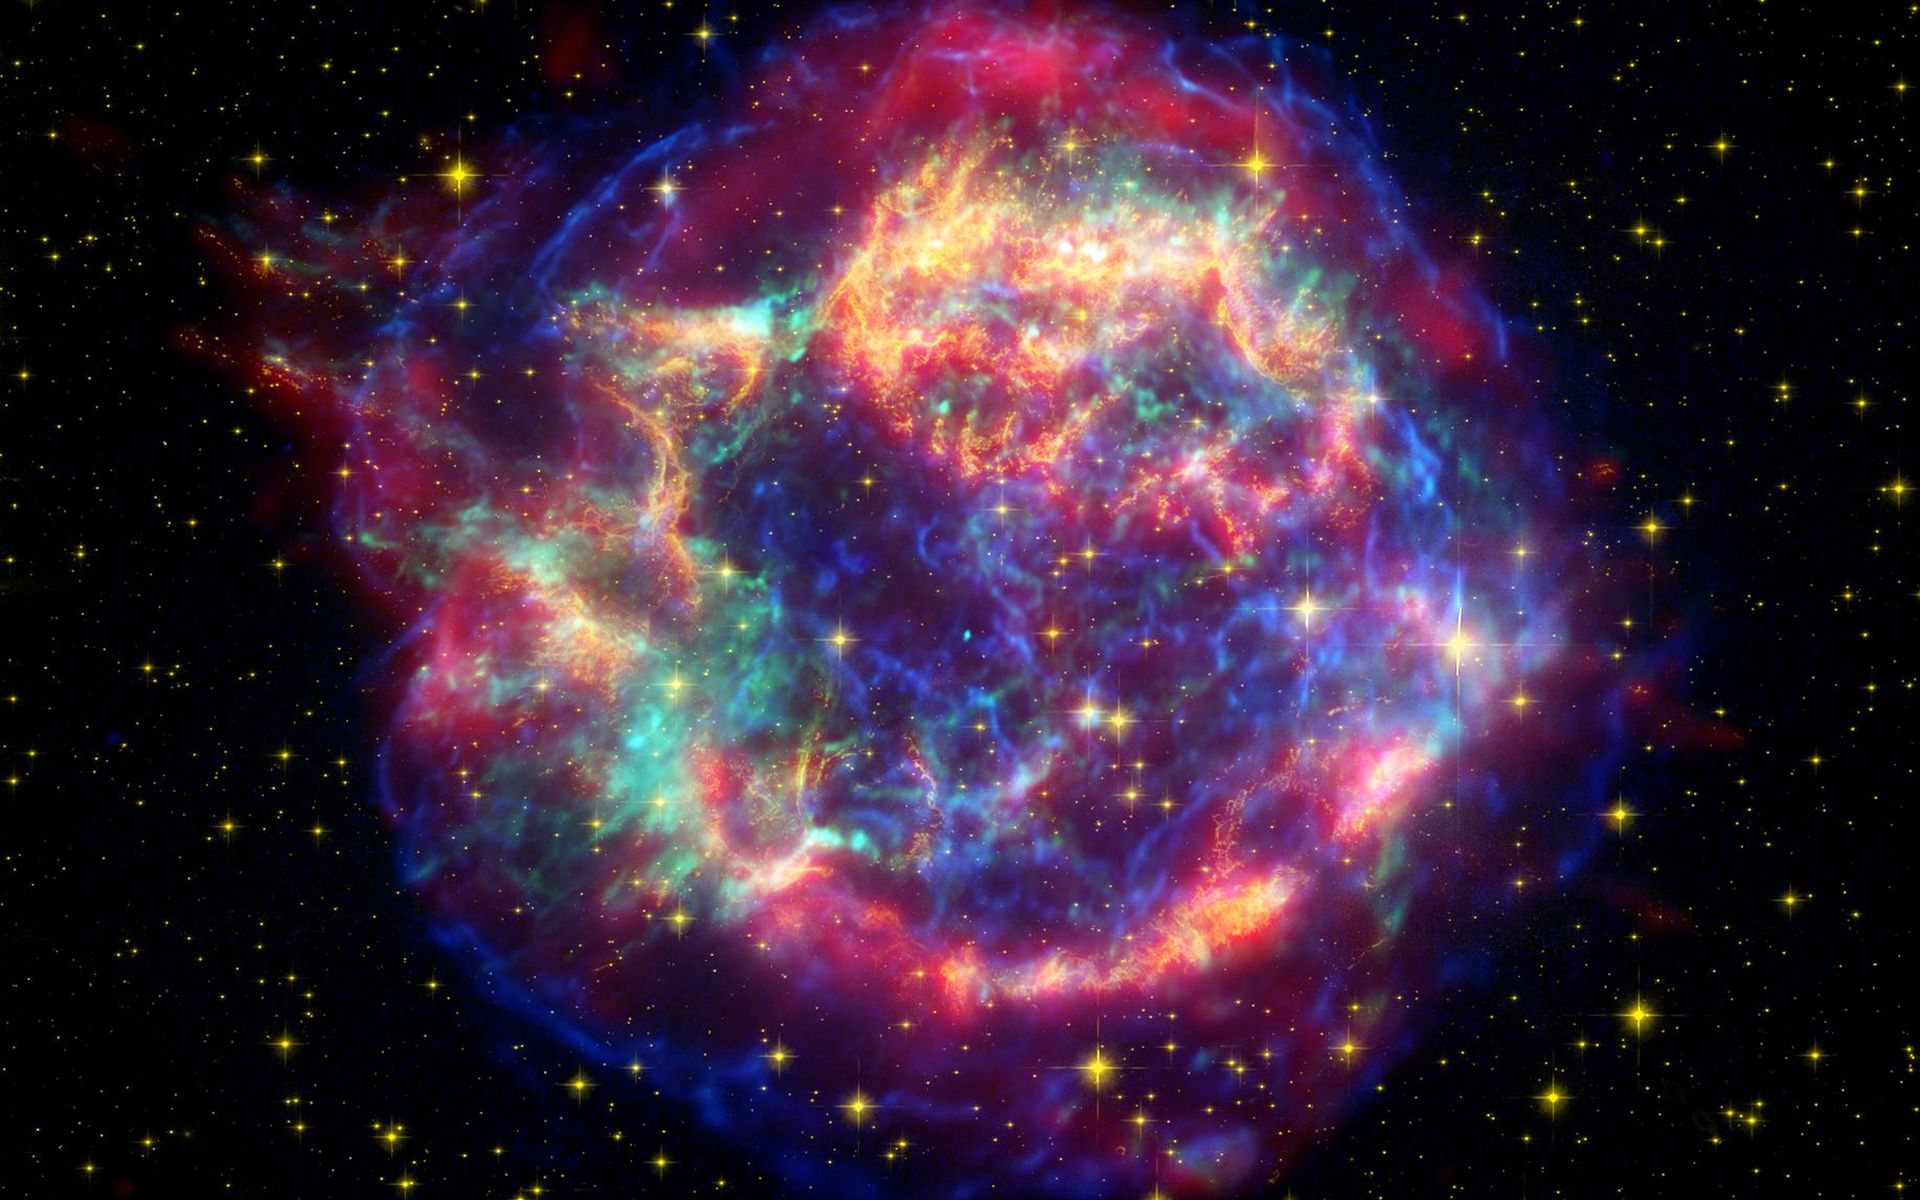 Space Images | Cassiopeia A: Death